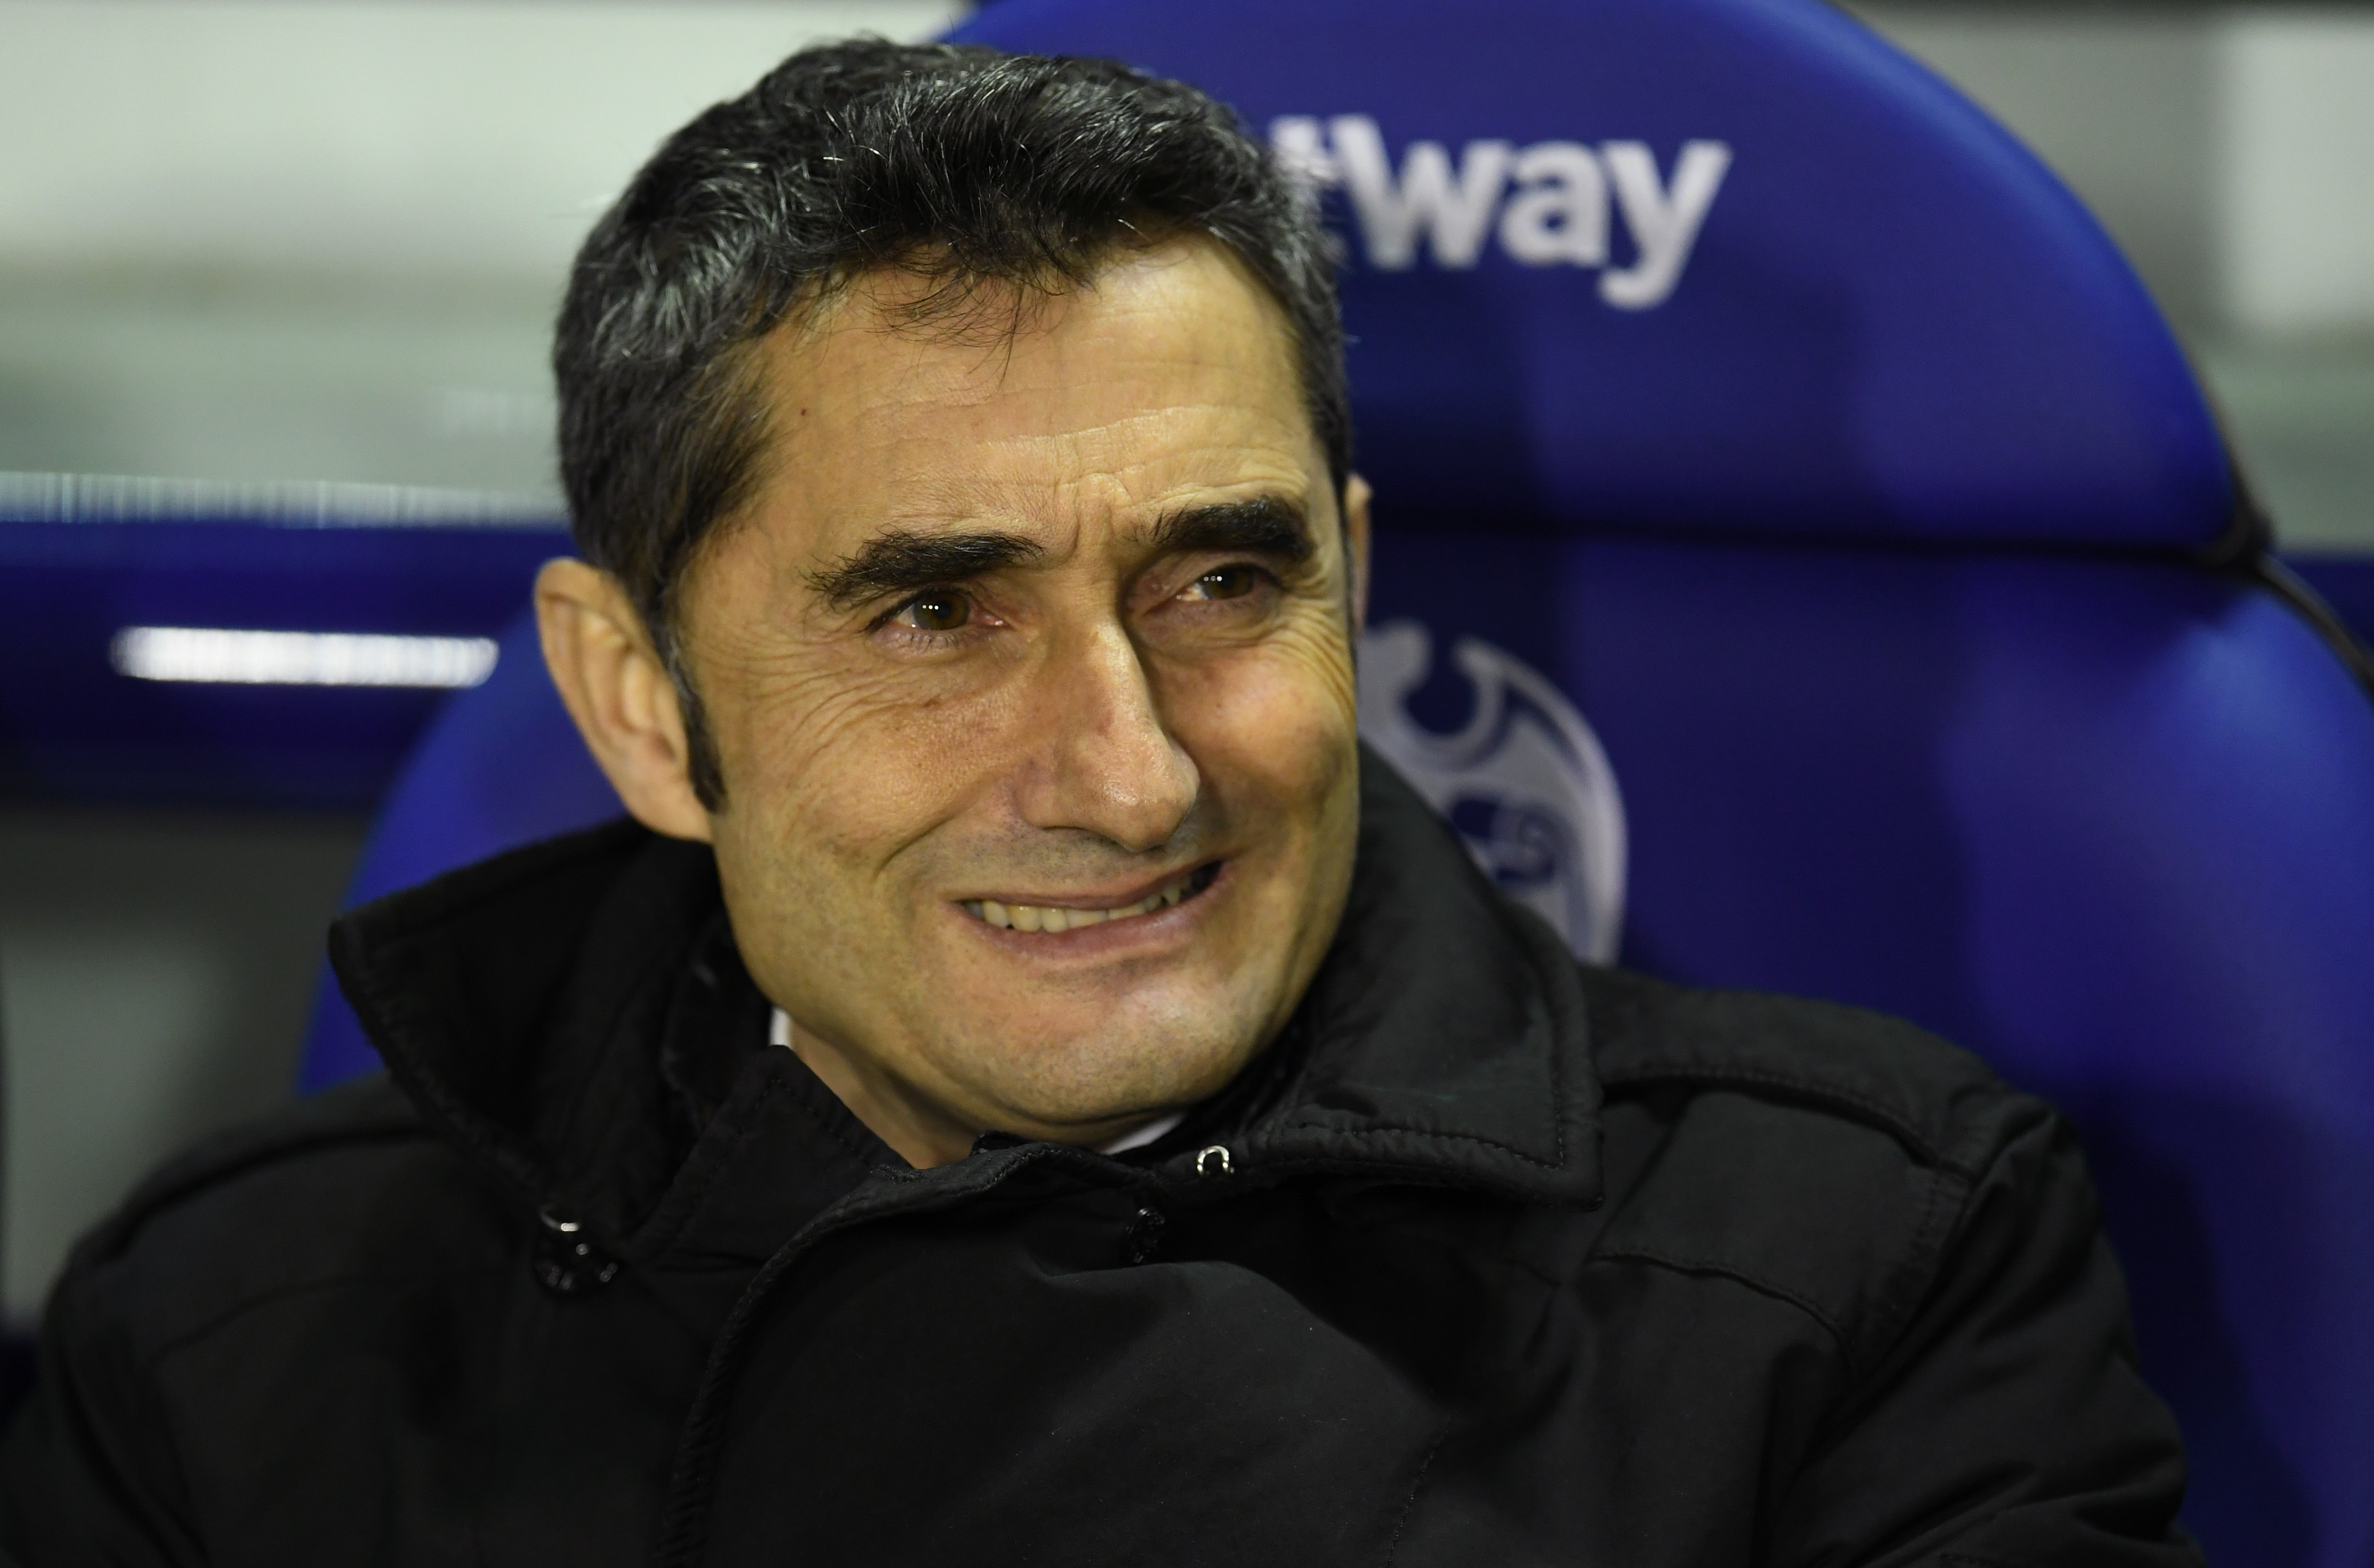 VALENCIA, SPAIN - JANUARY 10:   Ernesto Valverde, Manager of Barcelona looks on prior to the Copa del Rey Round of 16 match between Levante and FC Barcelona at Ciutat de Valencia on January 10, 2019 in Valencia, Spain. (Photo by David Ramos/Getty Images)